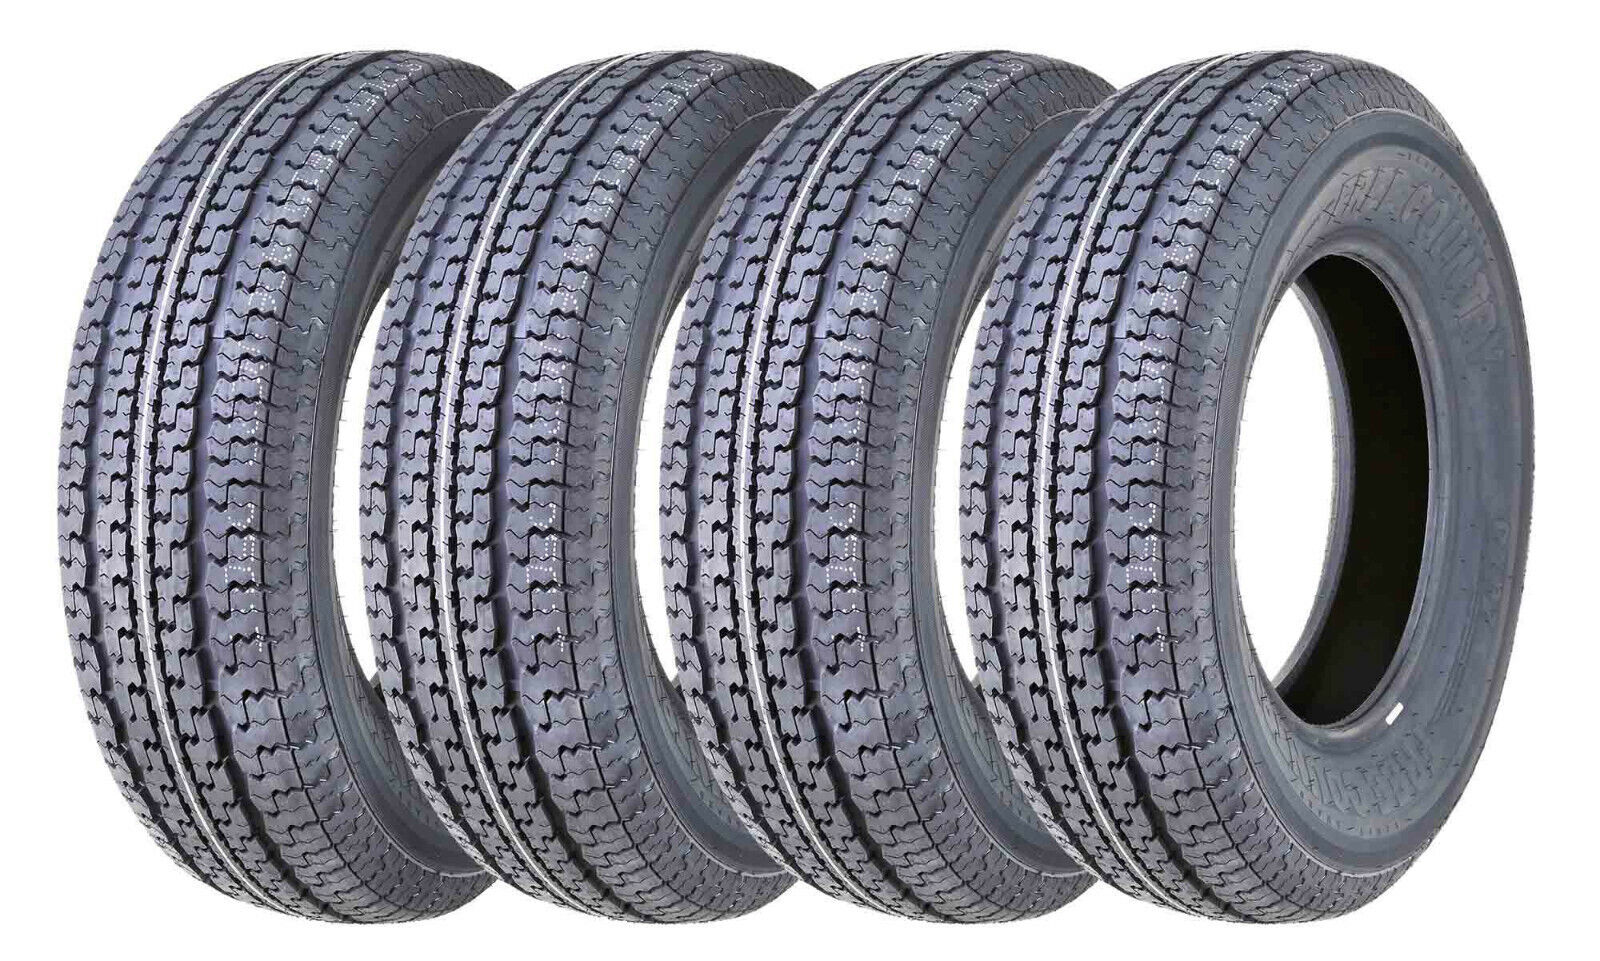 4 ST 205/75R15 Trailer Tires FREE COUNTRY  205 75 15 10PR Radial LRE Heavy Duty